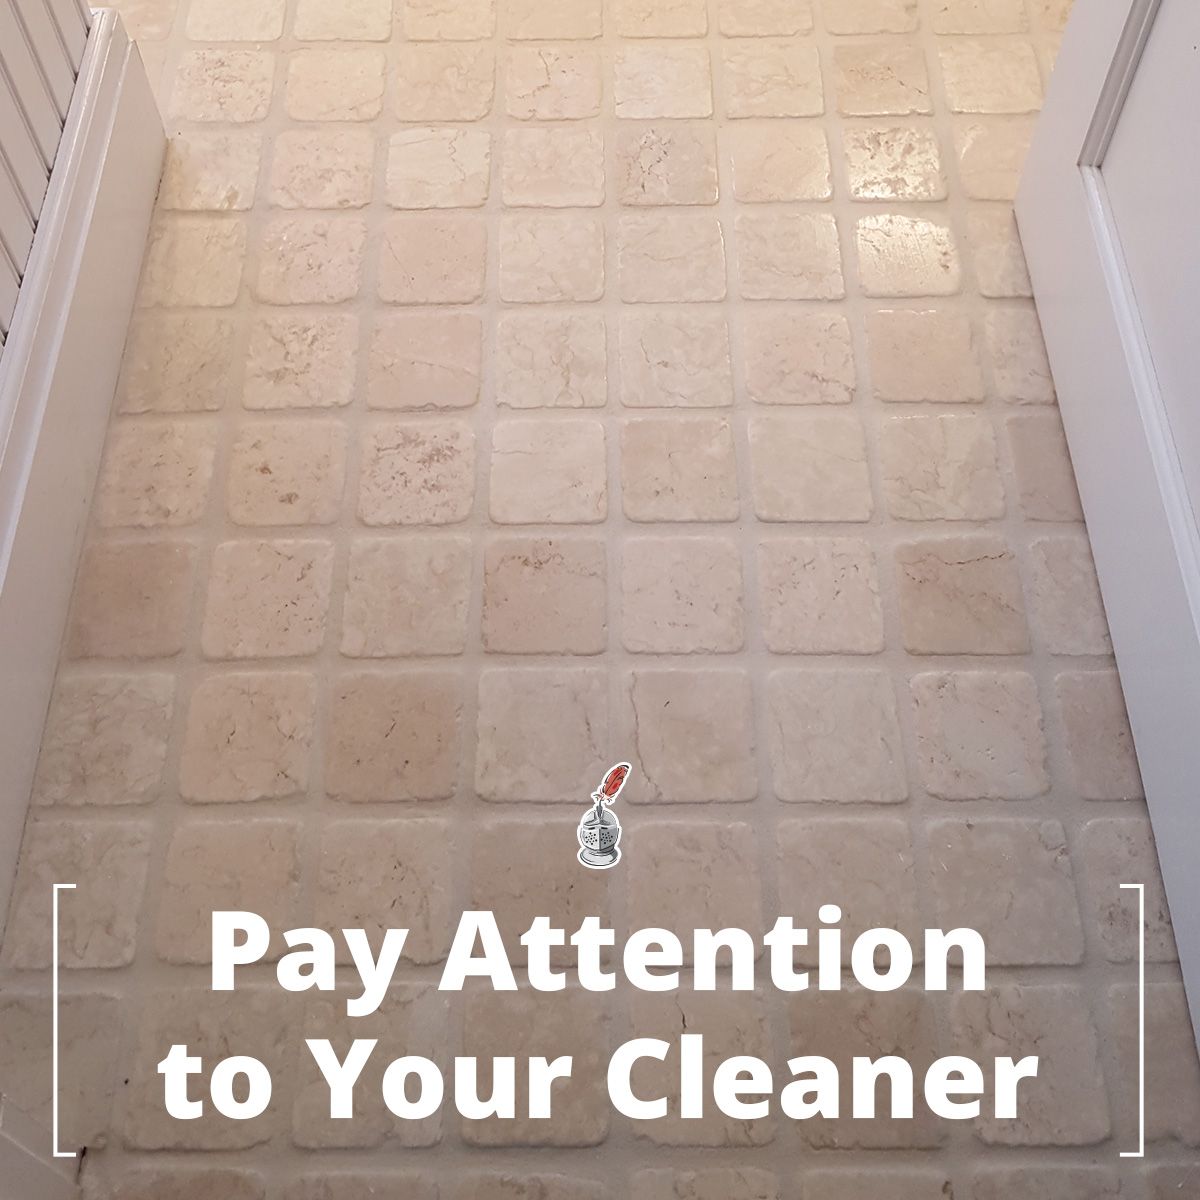 Pay Attention to Your Cleaner